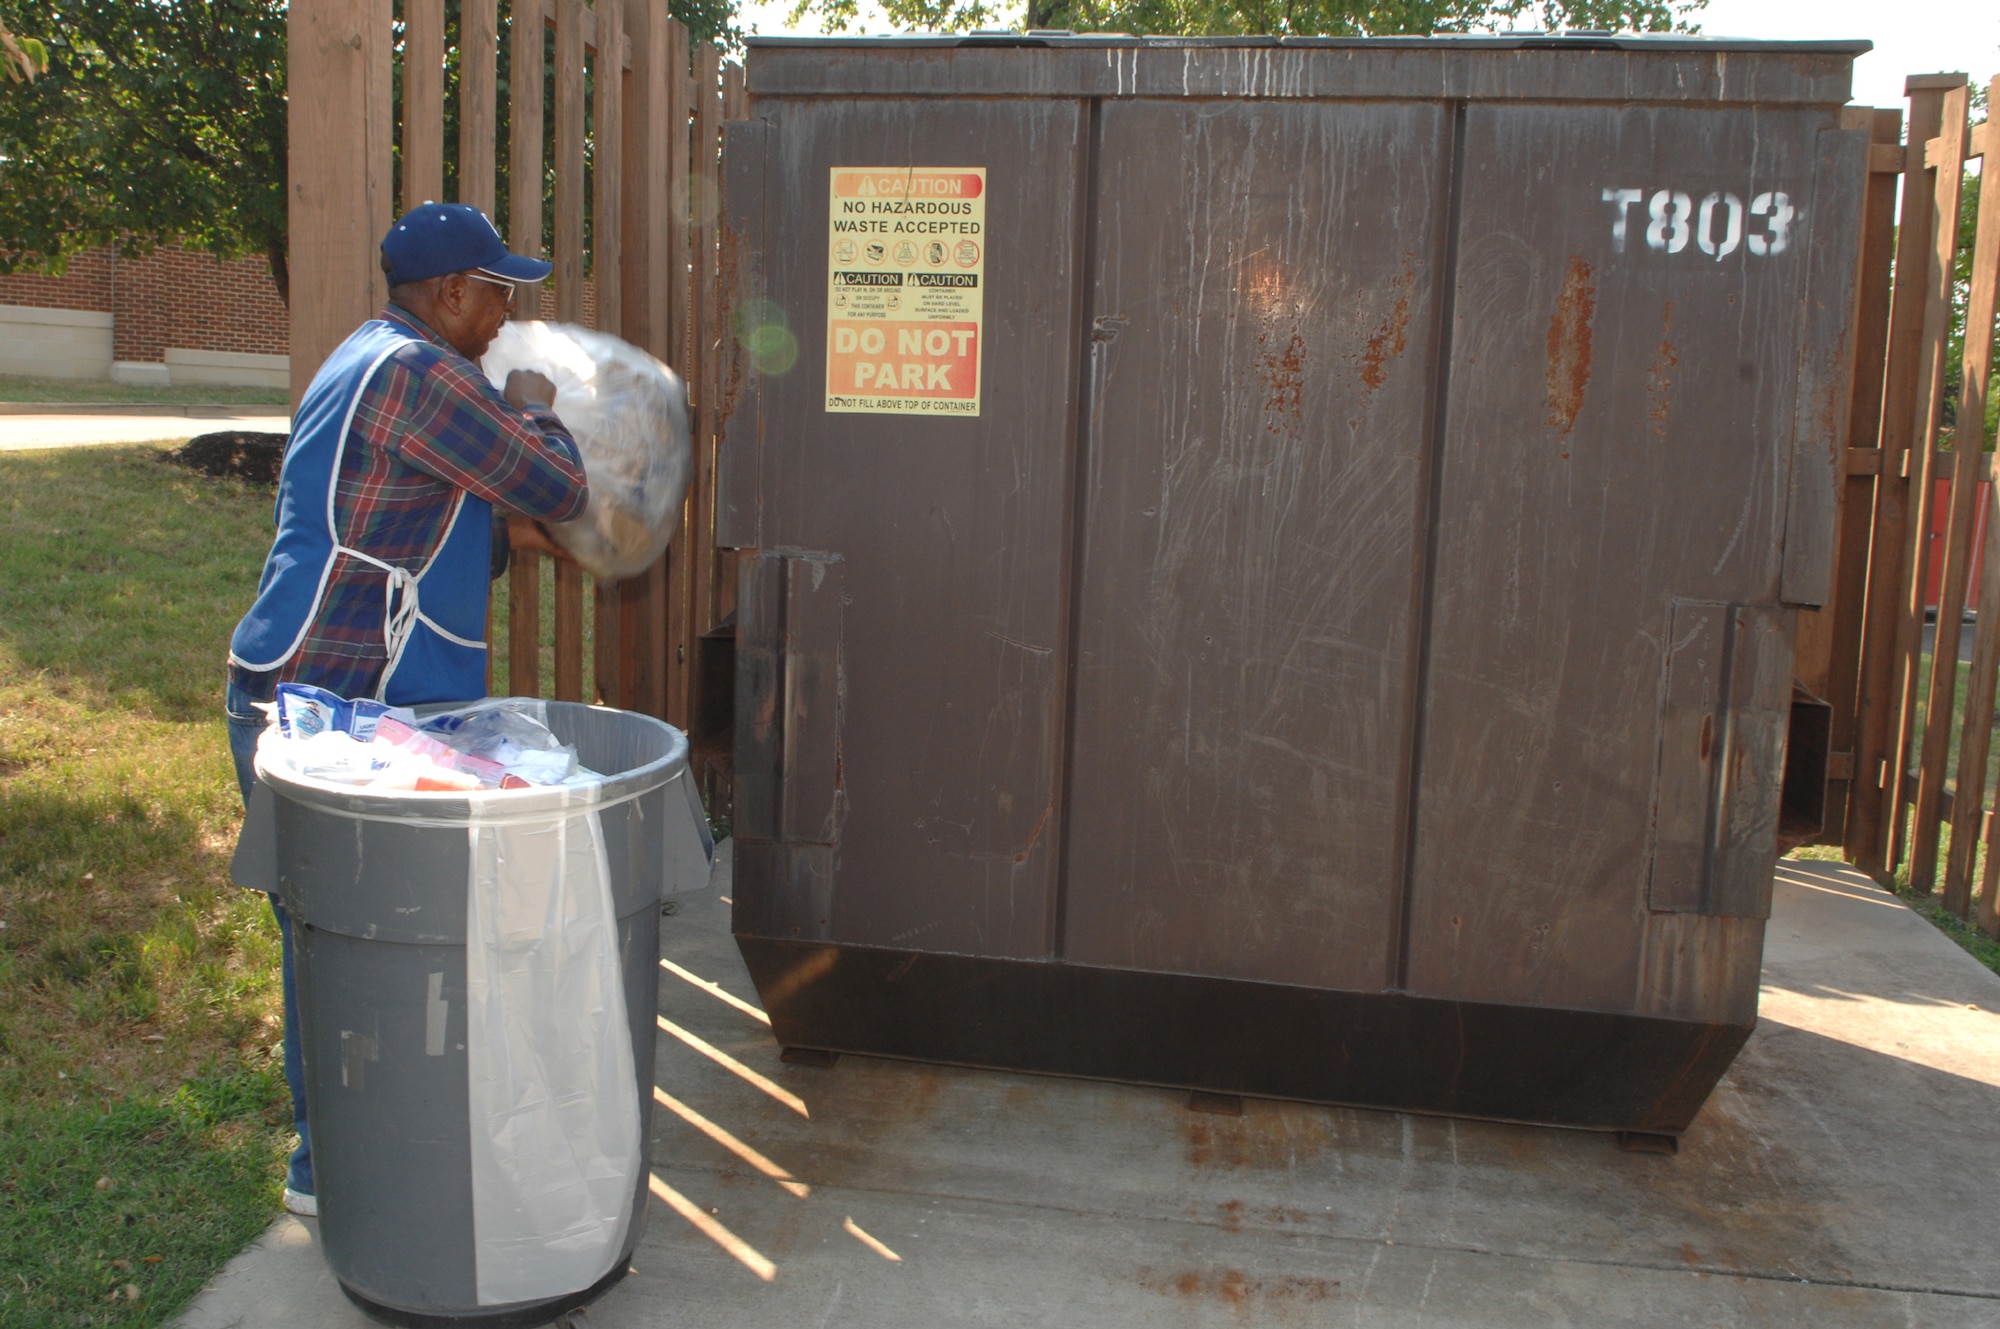 Leroy Carey empties the trash outside the U.S. Air Force Honor Guard building on Bolling Aug. 2. Mr. Carey works for the Goodwill company, which cleans the inside of all offices on base. (U.S. Air Force photo by Airman 1st Class Timothy Chacon)